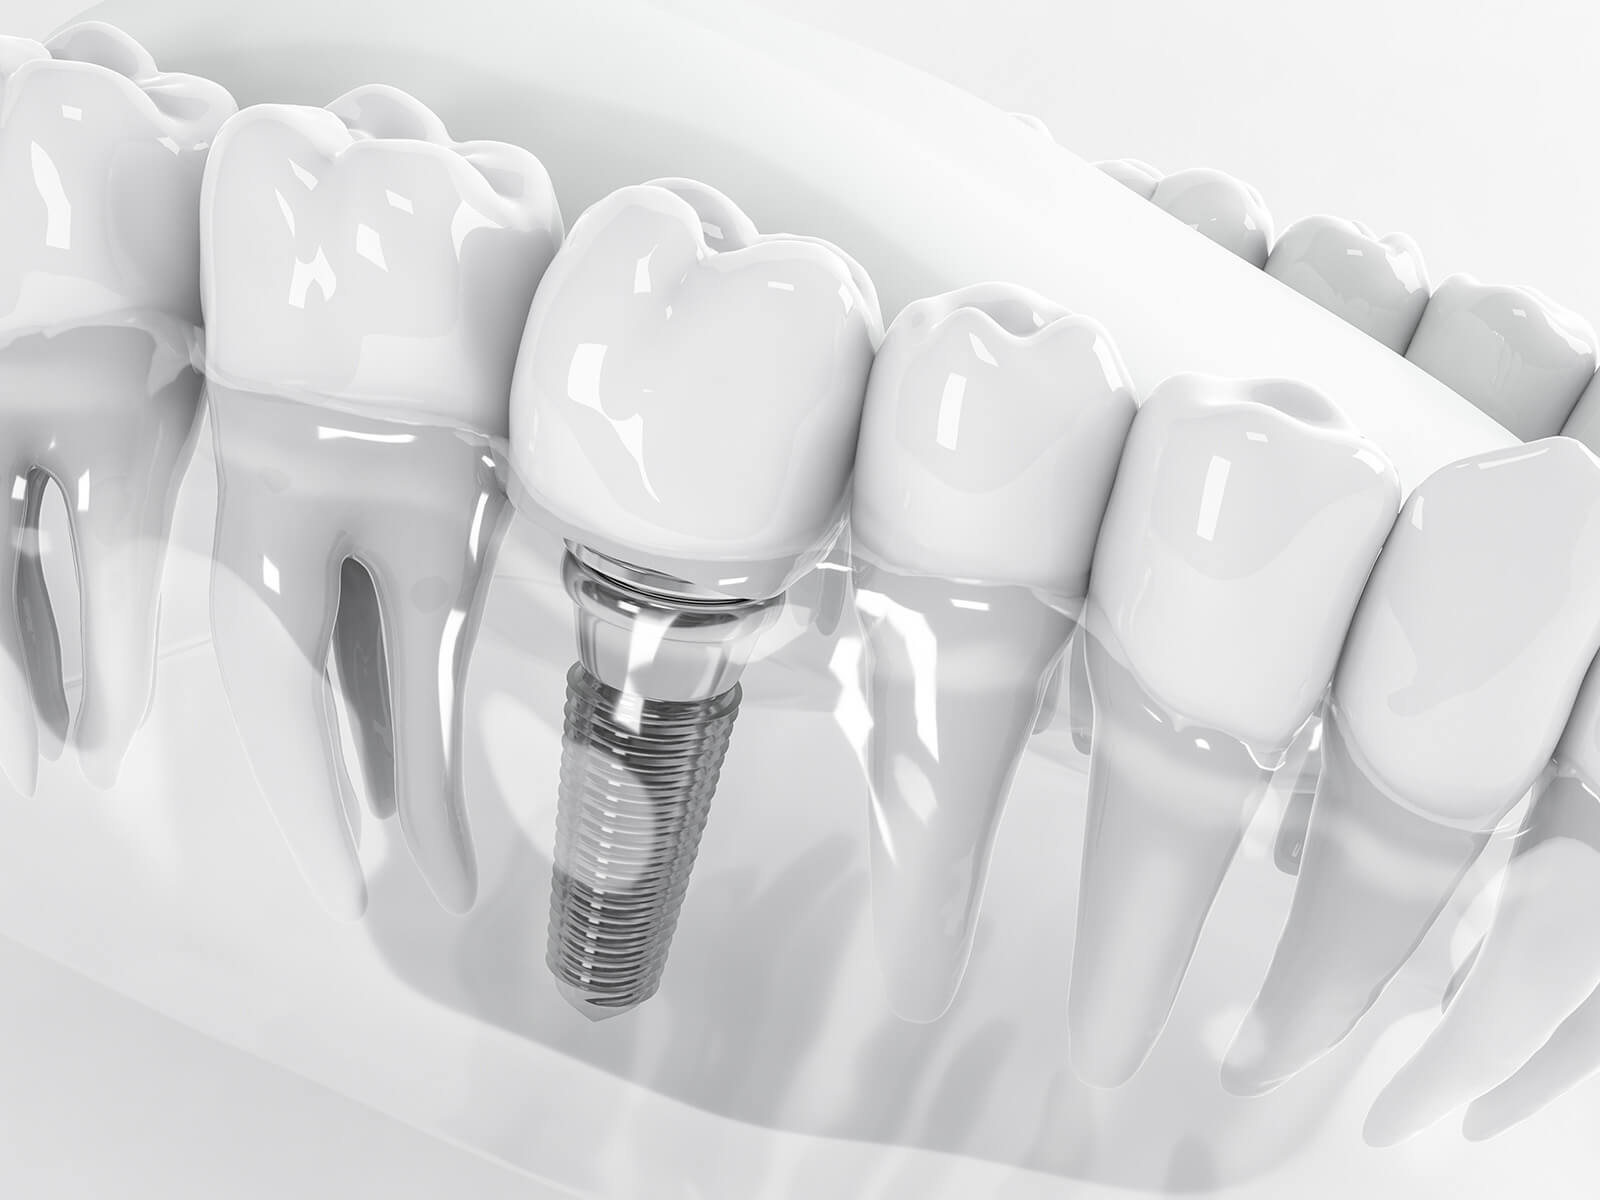 What Are The Most Common Complications of Dental Implants?